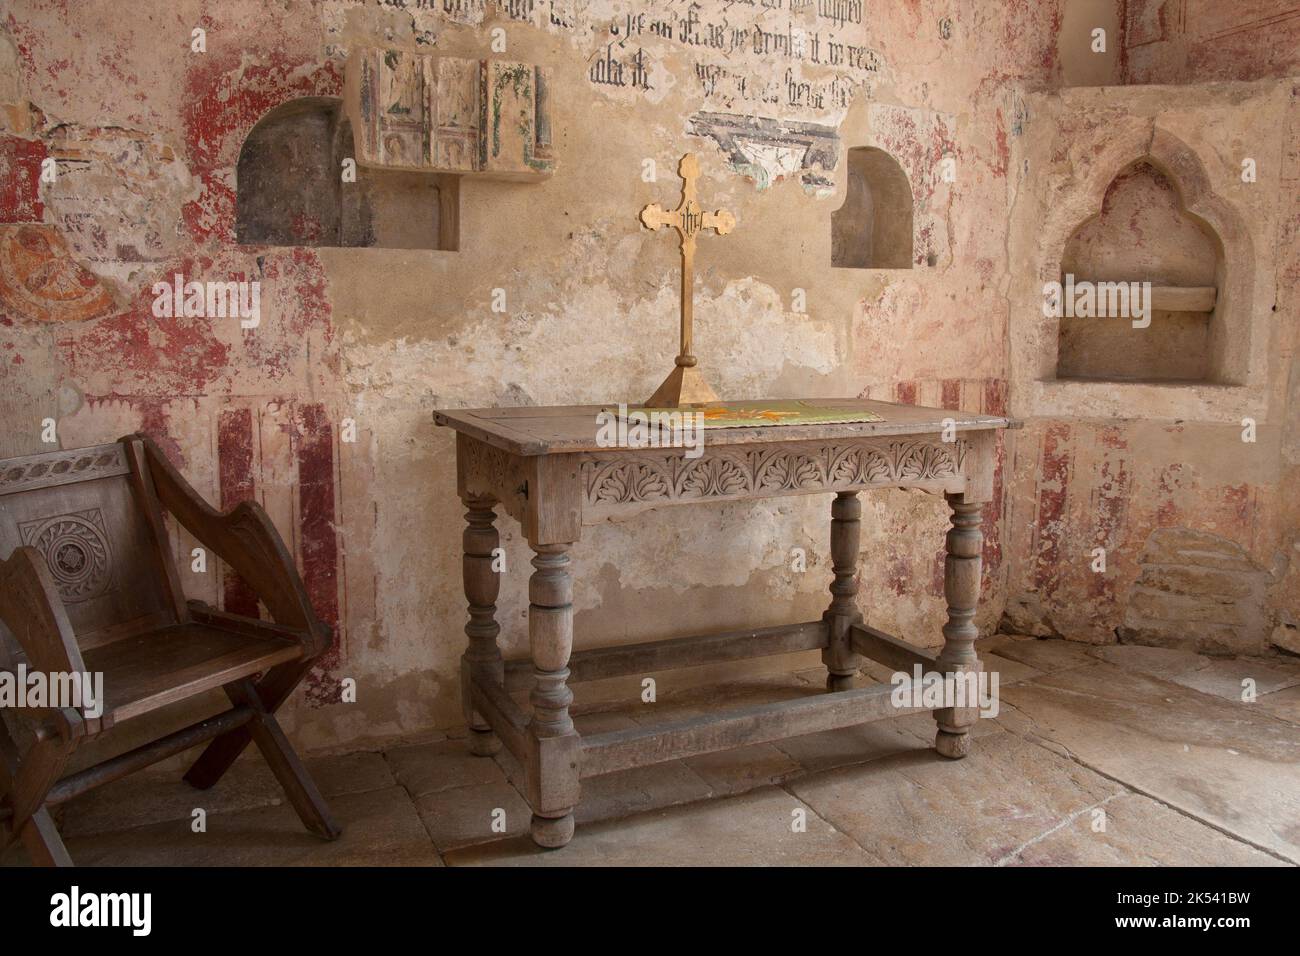 St John the Baptist medieval church Inglesham with it's wall preserved wall paintings, nr. Swindon, Wiltshire, England, with Anglo-Saxon origins Stock Photo